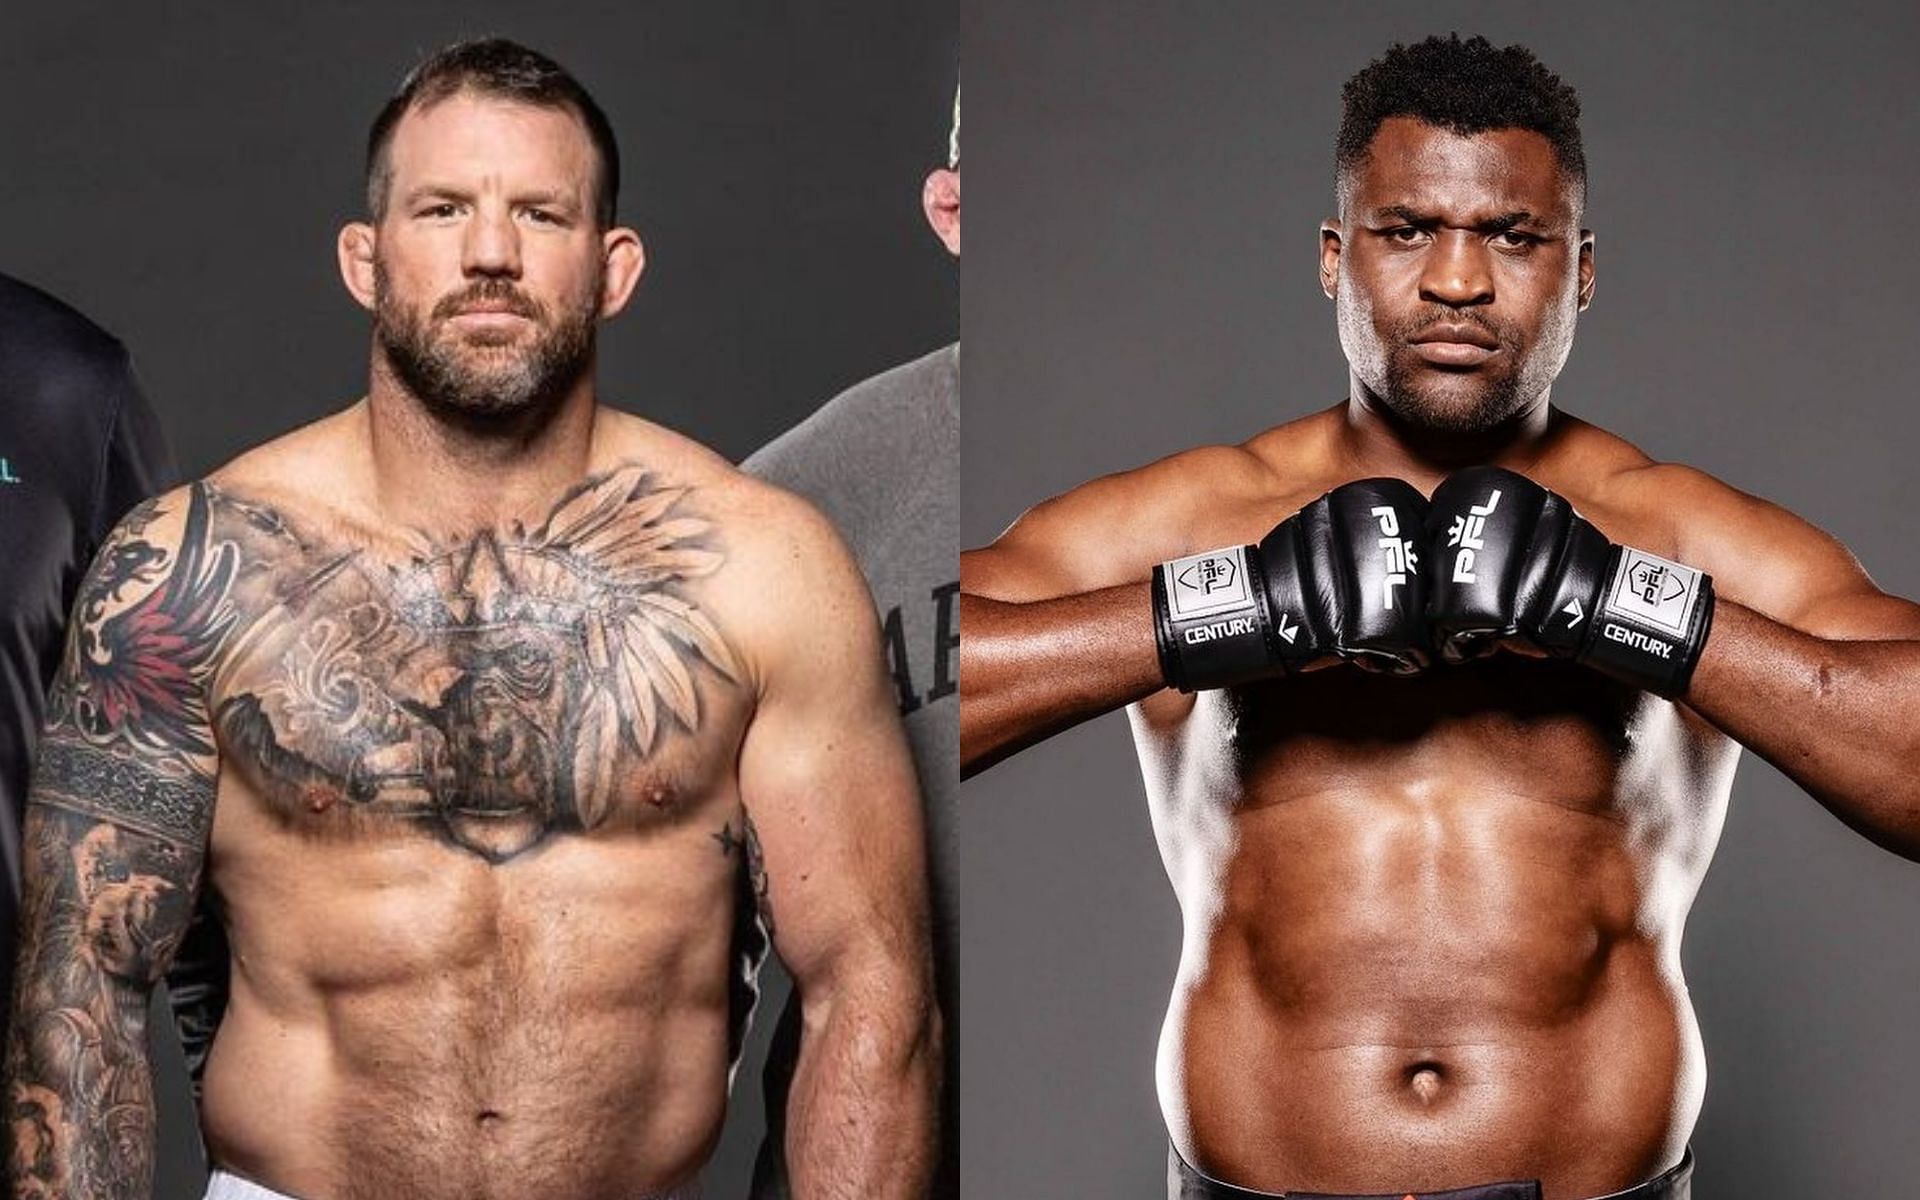 Ryan Bader (left) a risky opponent for Francis Ngannou (right) says former UFC star [Image courtesy @ryanbader and @francisngannou on Instagram]